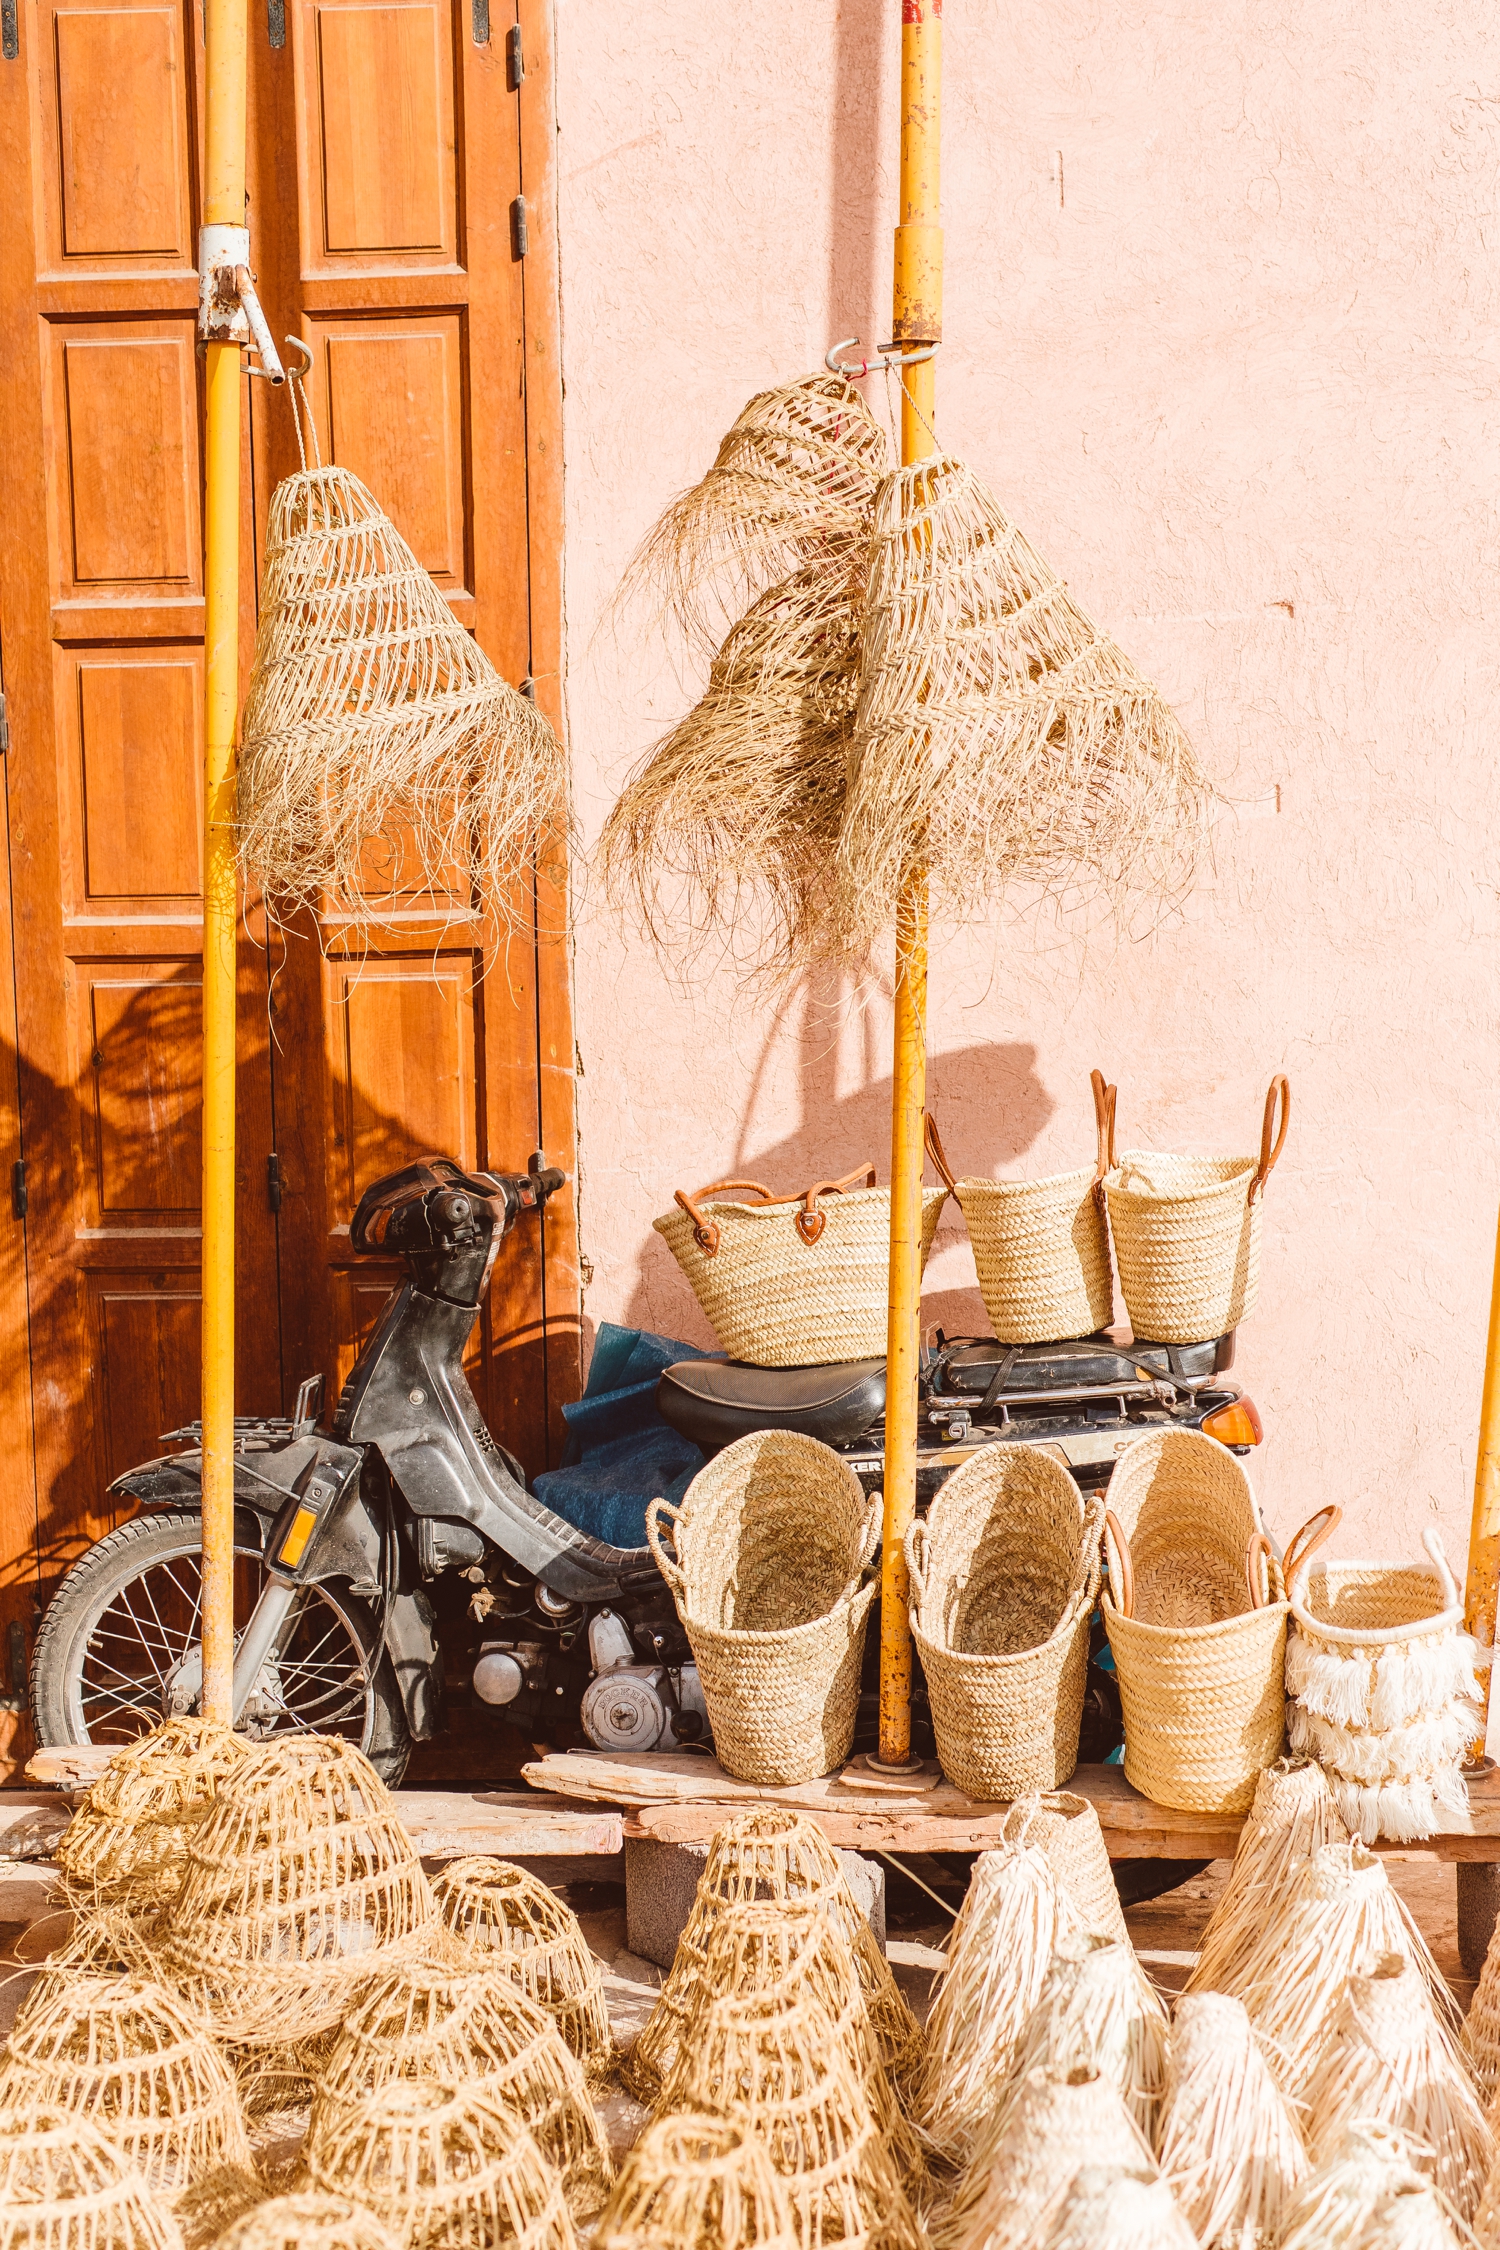 Straw baskets for sale at outdoor market in Marrakesh, Morocco | Brooke Michelle Photography